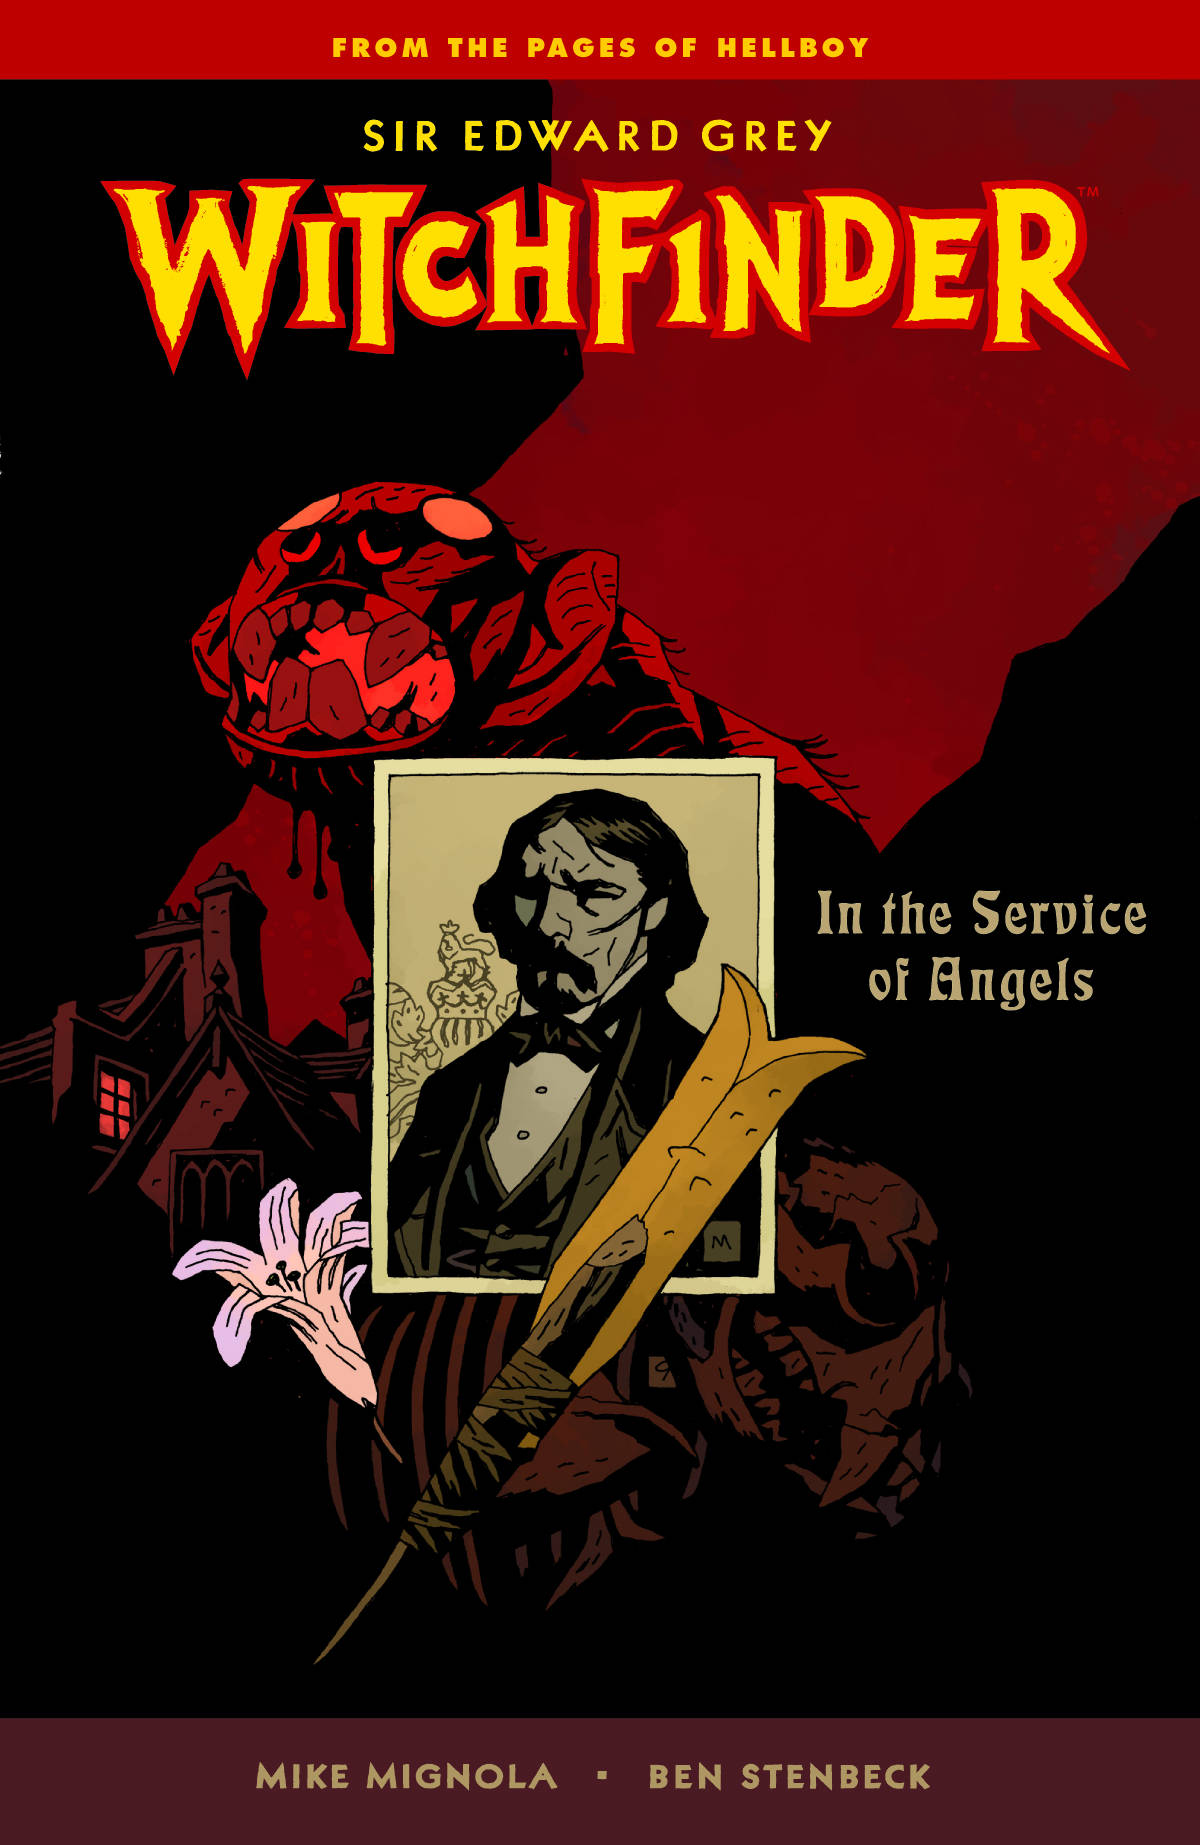 Witchfinder Graphic Novel Volume 1 In The Service of Angels